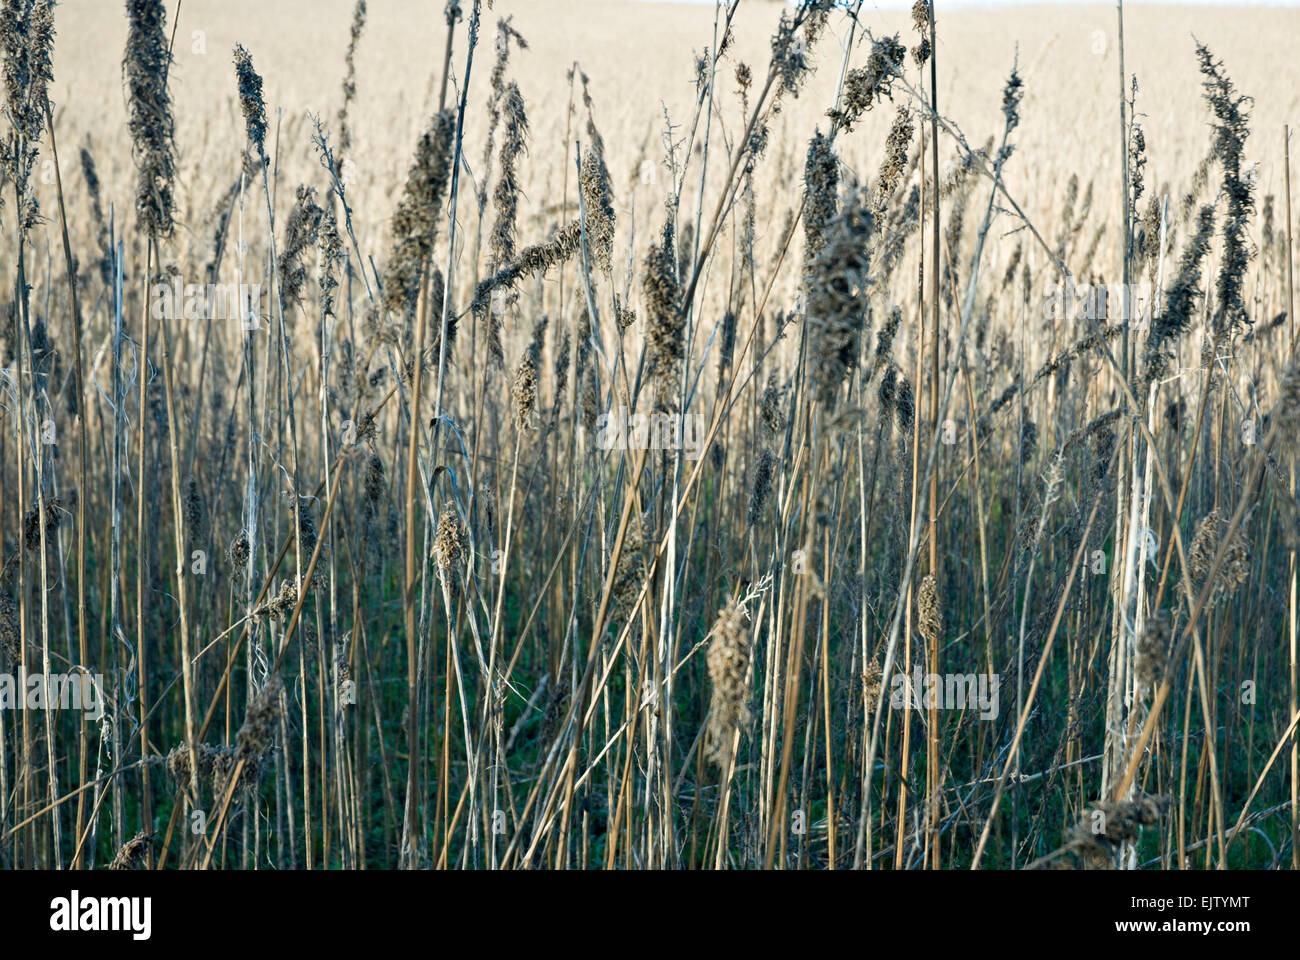 Grass stems with seed pods Stock Photo